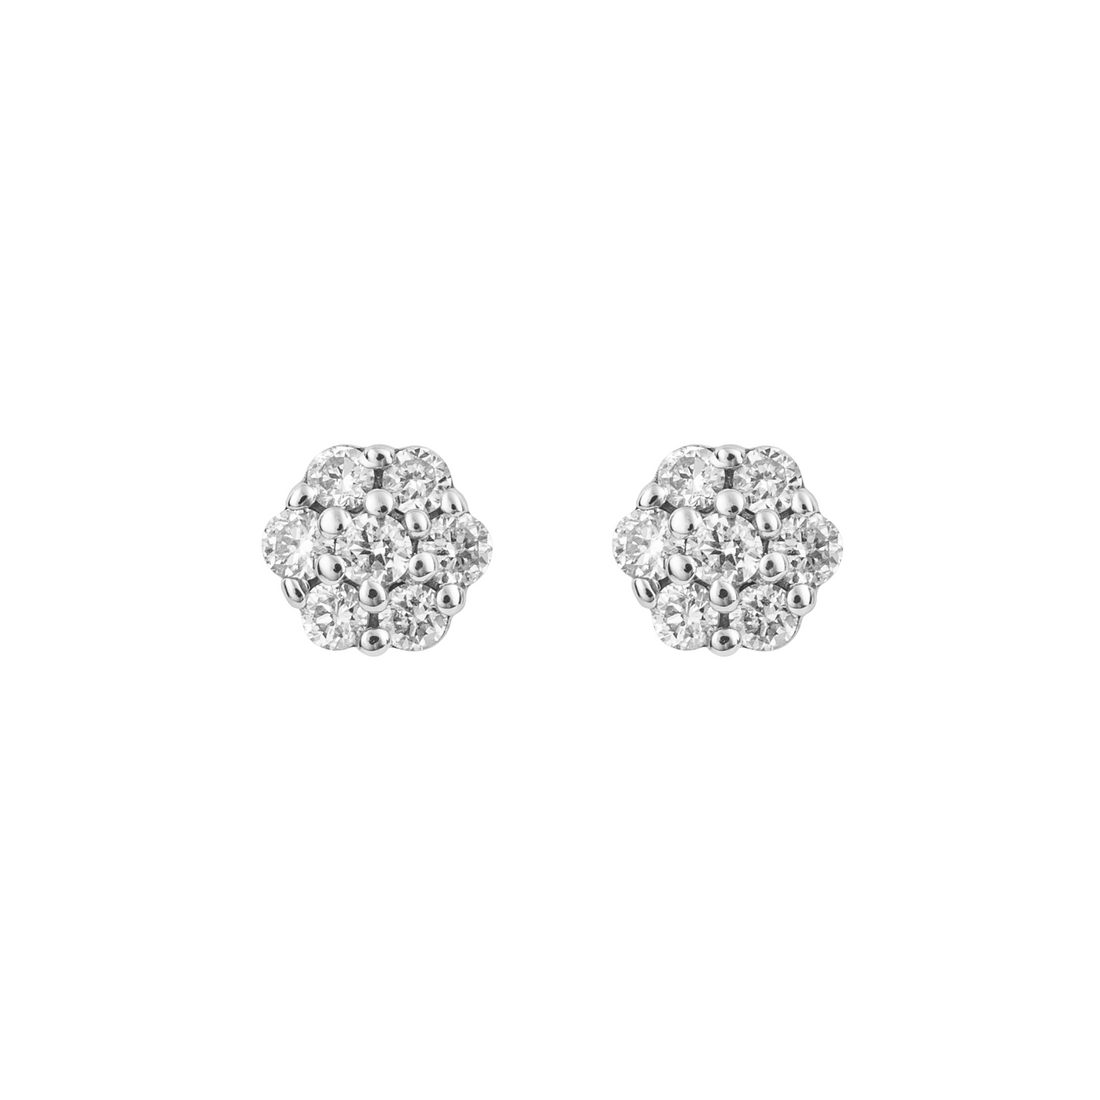 Small Flower Stud Earrings with Diamond in 9ct White Gold - Robert Anthony Jewellers, Edinburgh